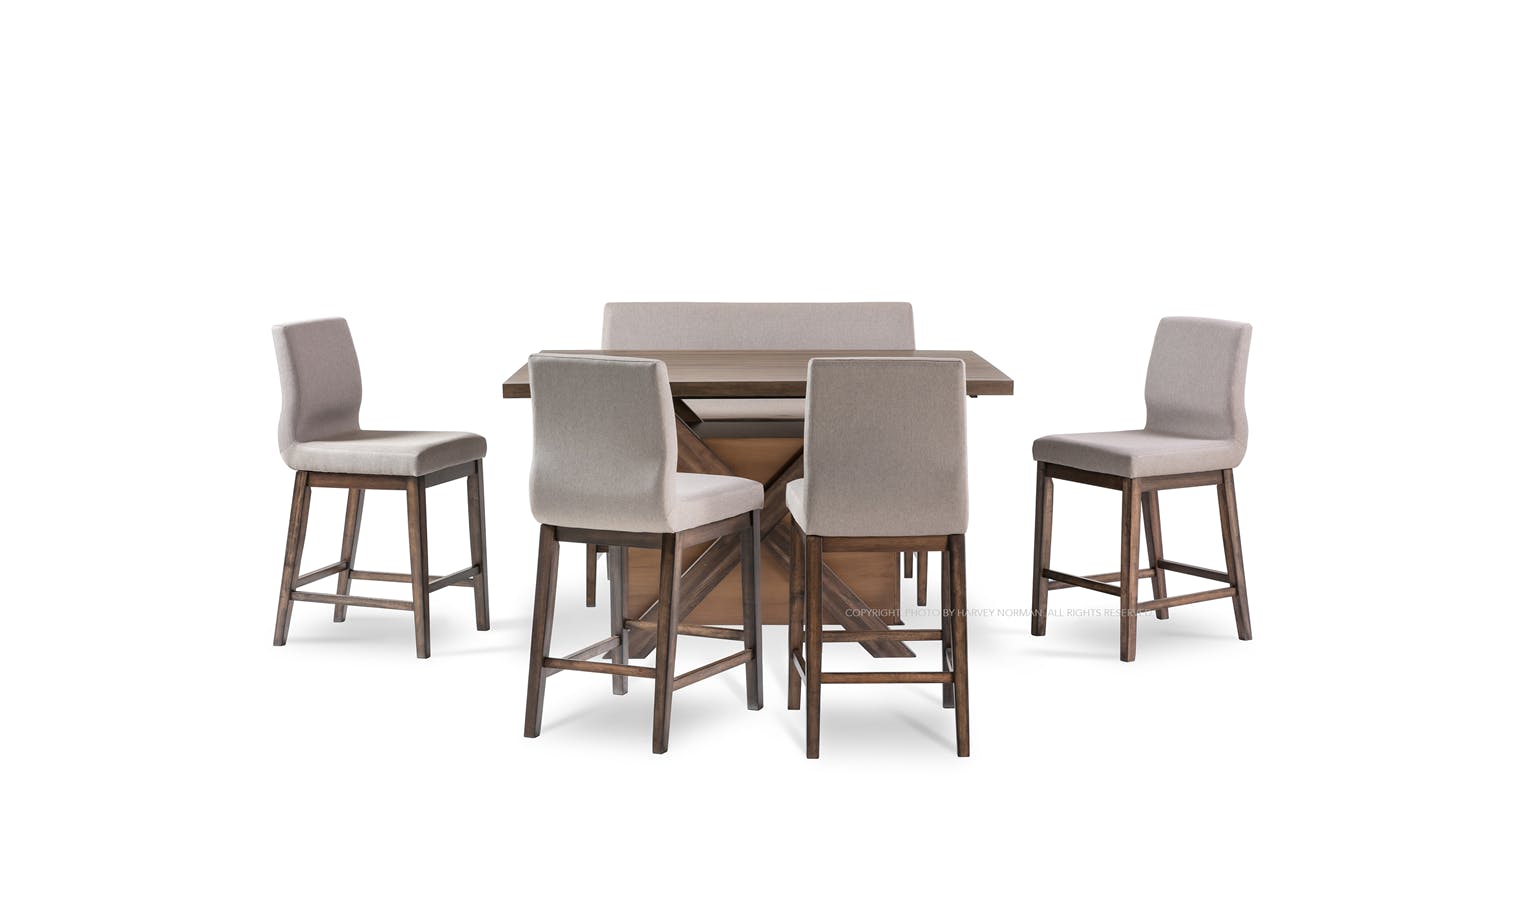 hayley dining room set reviews